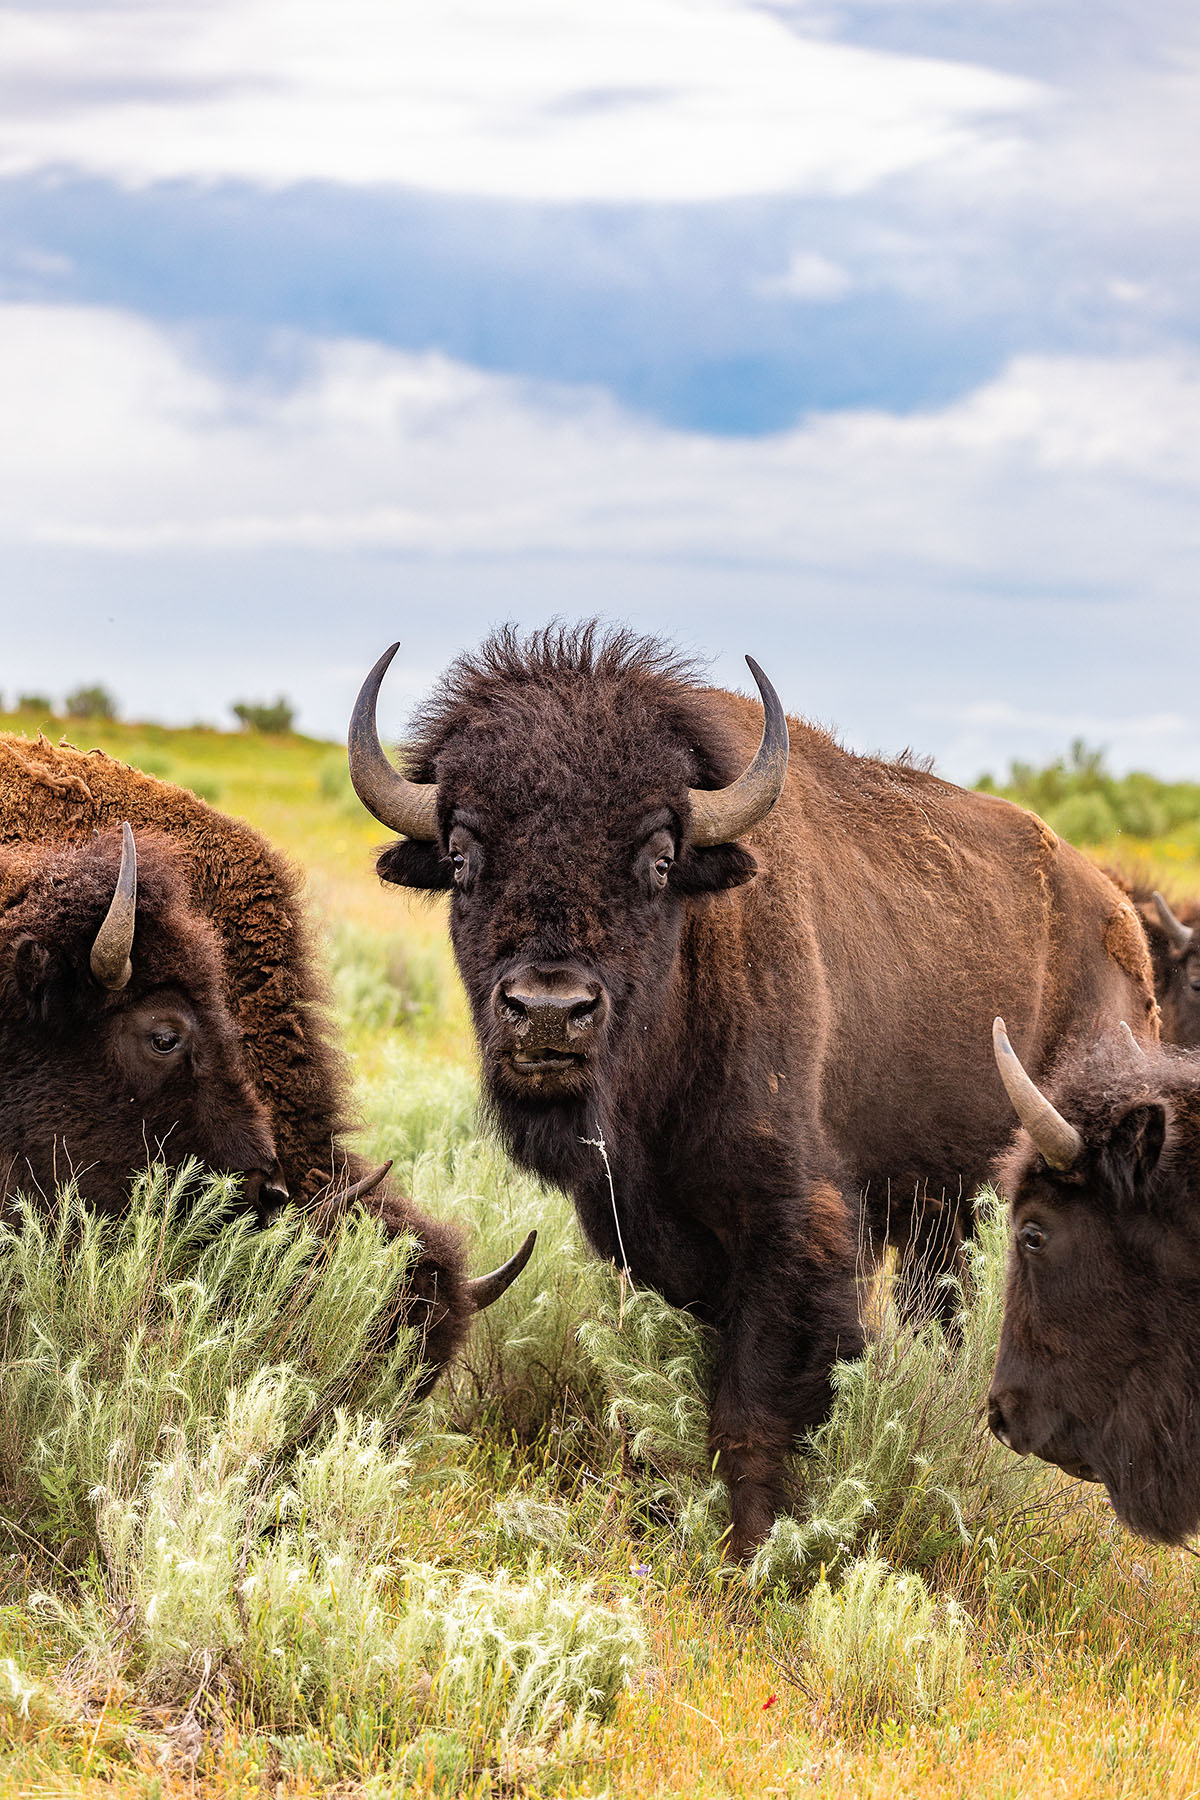 A brown bison with light brown hrons looks directly into the camera